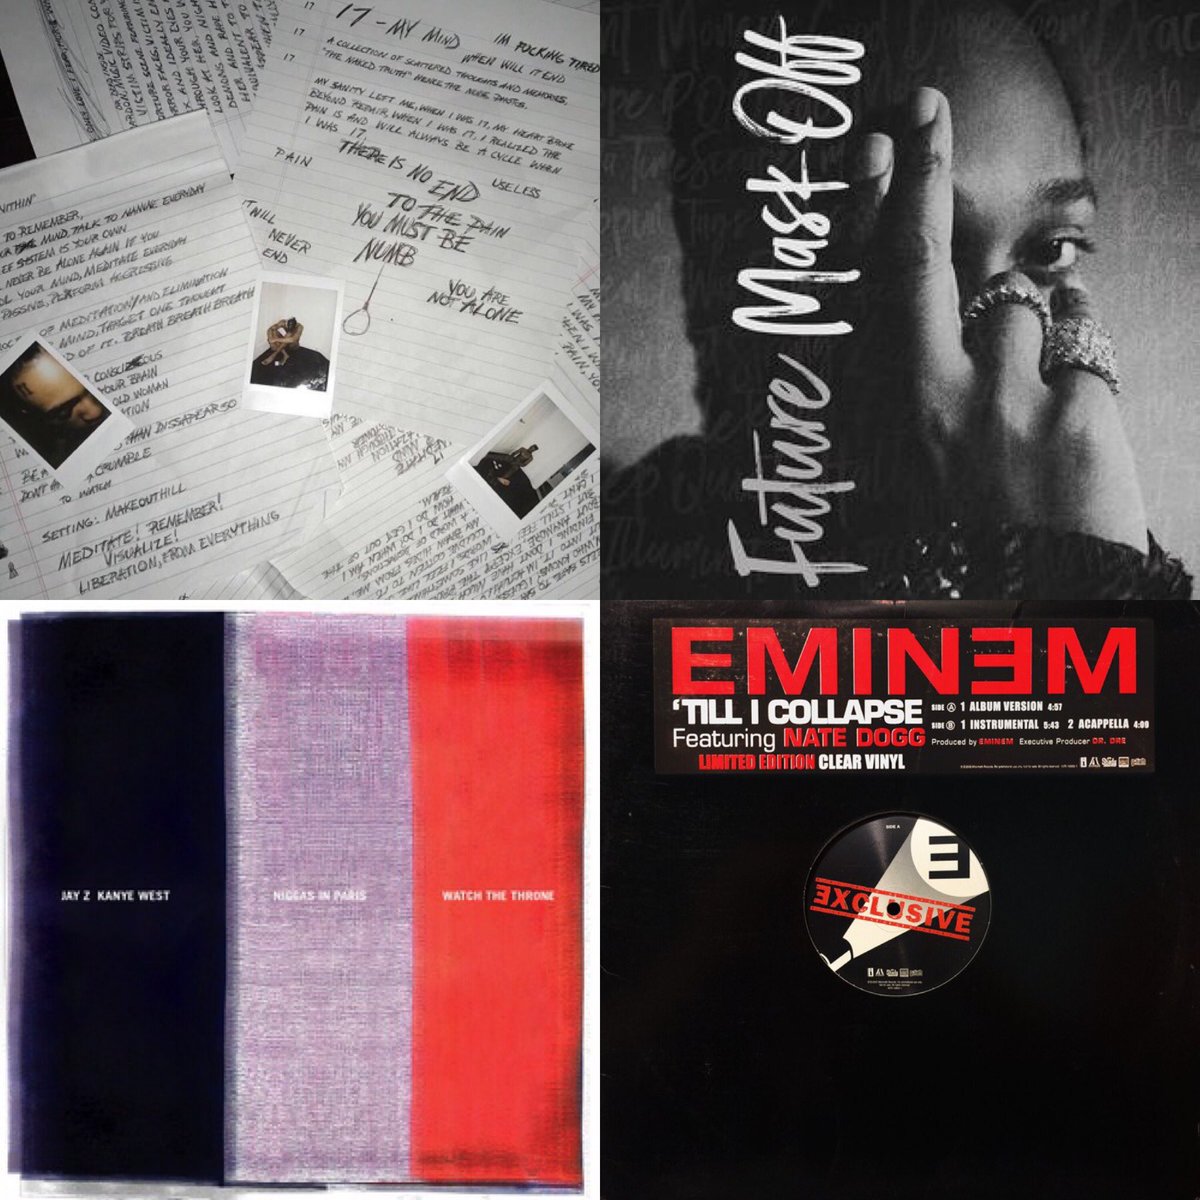 Here’s a few rap song about to go Diamond! All are 9 times Platinum.
Watch The Throne - Nigga in Paris
Future - Mask Off
xxxtentacion - Fuck Love
Eminem - Till I Collapse 
#hiphop #raphistory